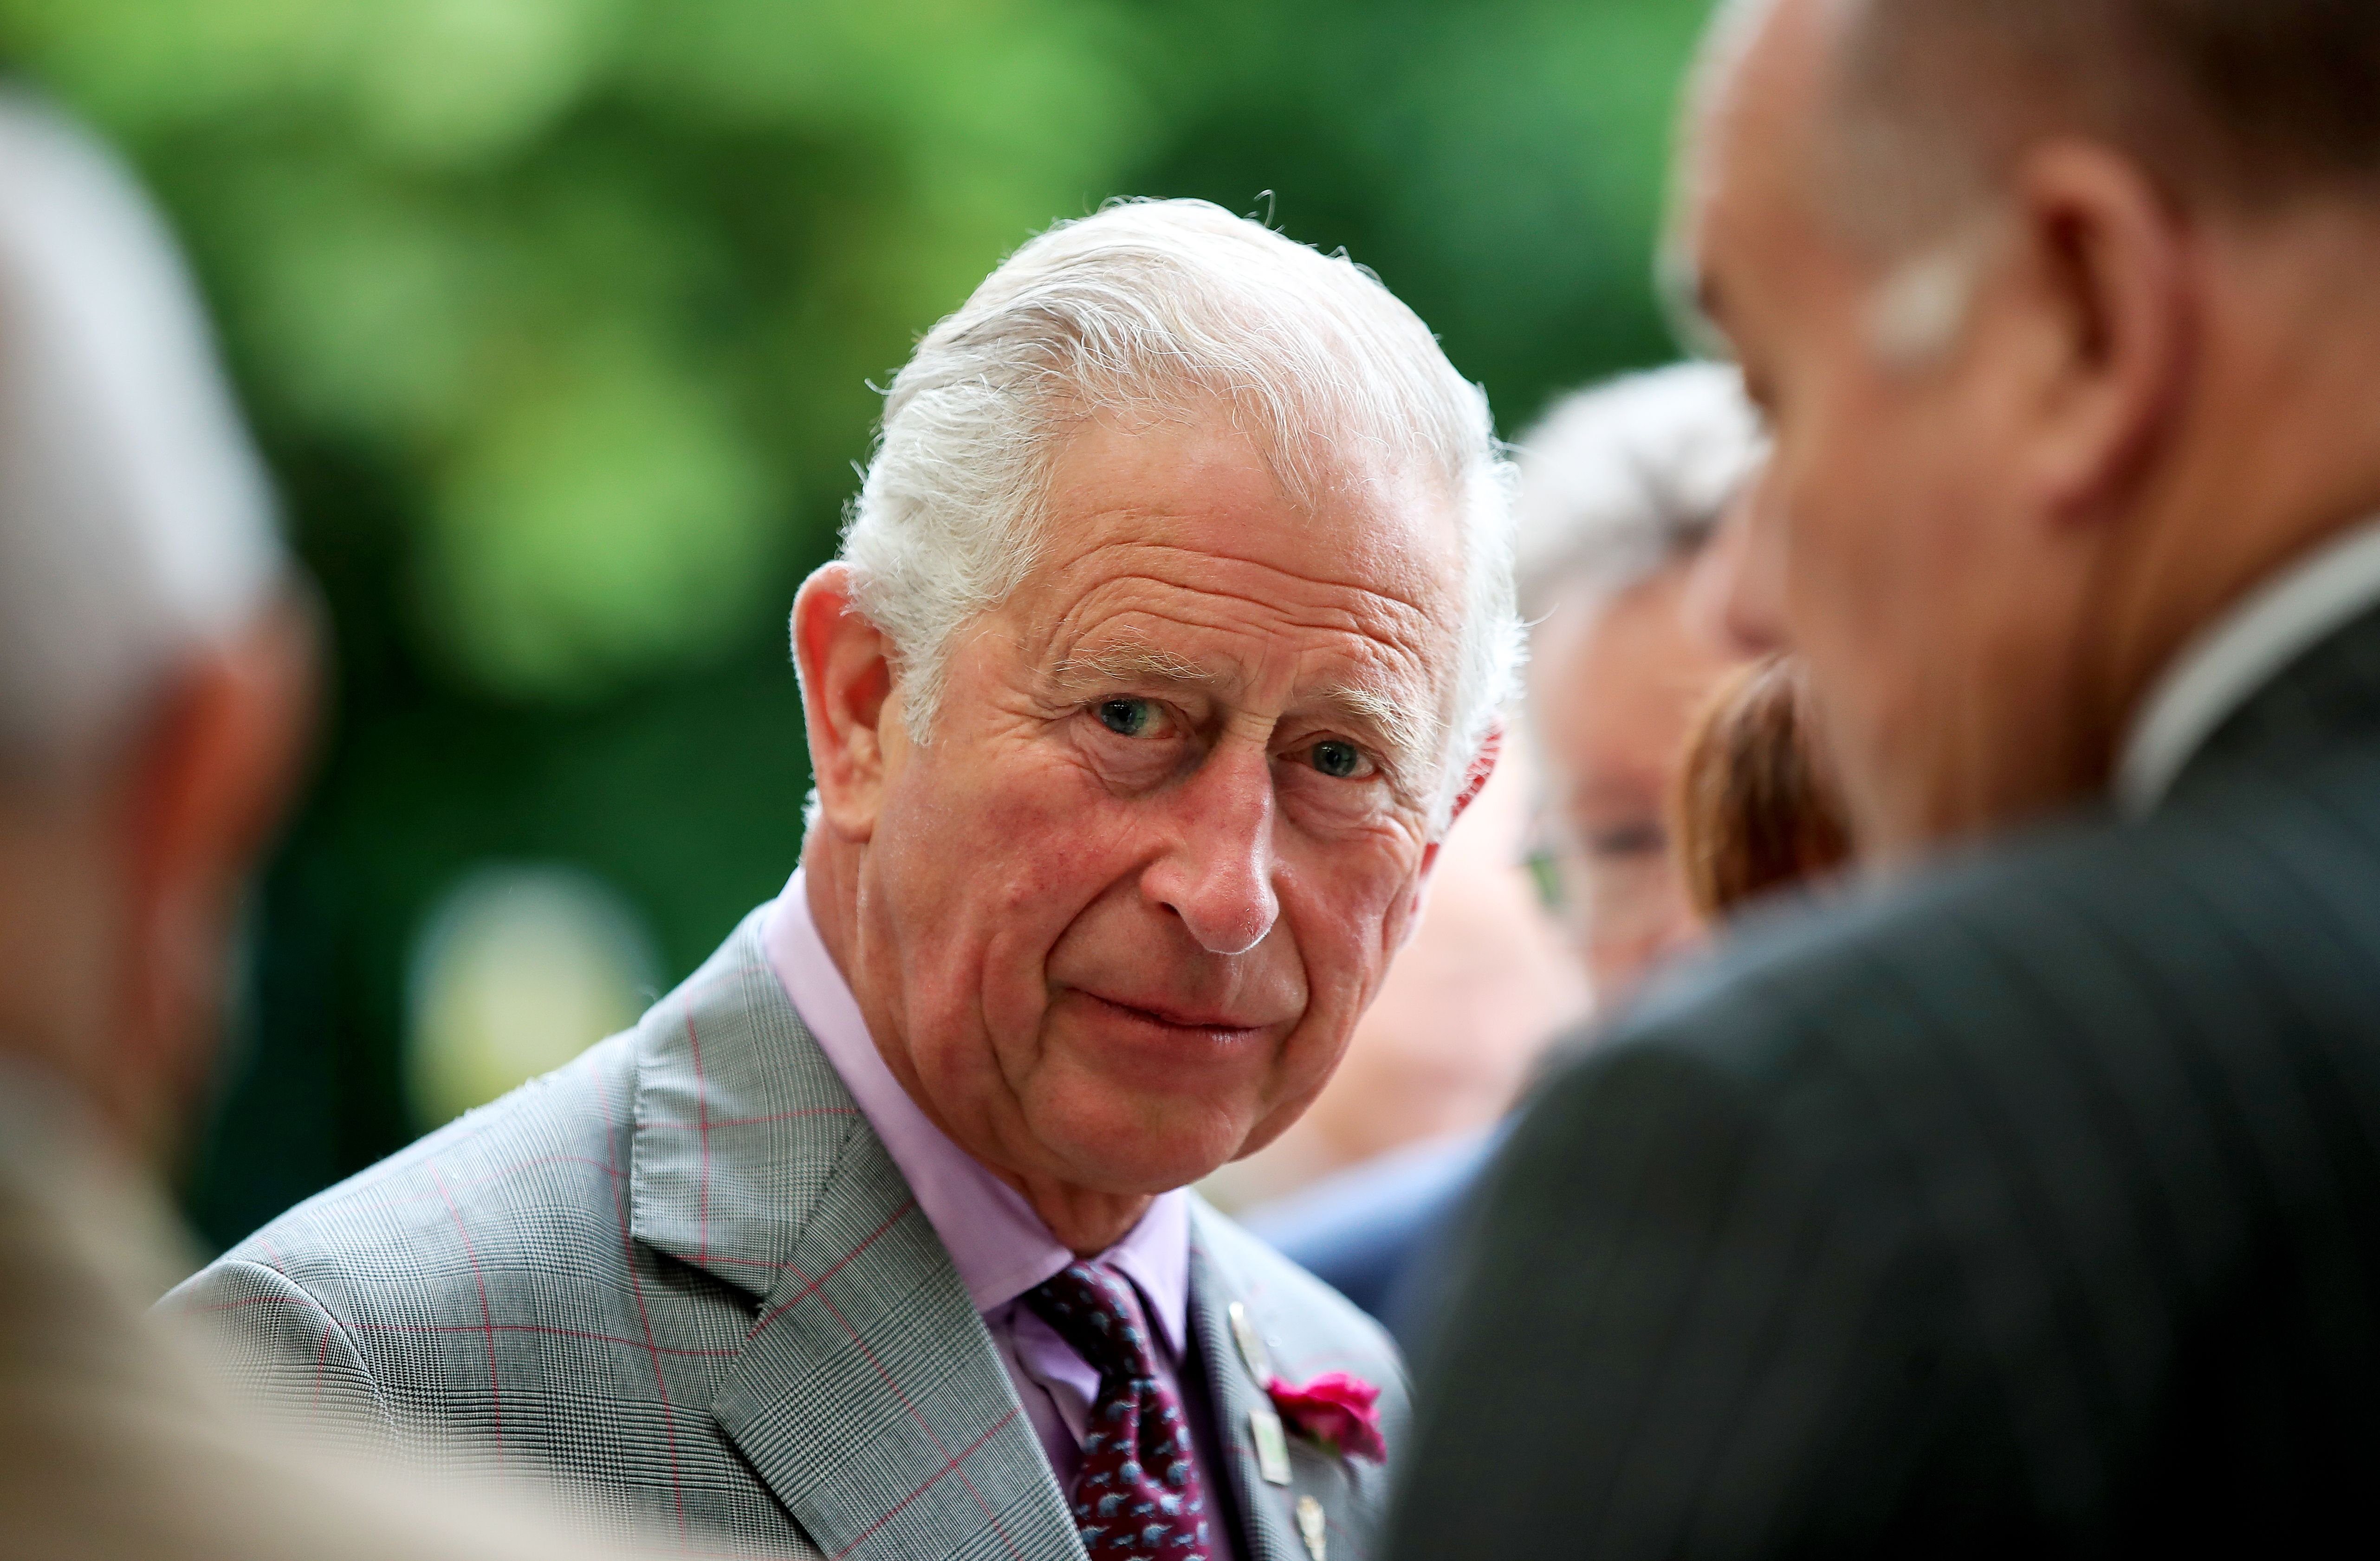 Prince Charles arrives for a visit to Woolcool in Stone, Staffordshire, to learn how they use sheep's wool to create alternative sustainable packaging for food and medicine. 19 Jul 2019